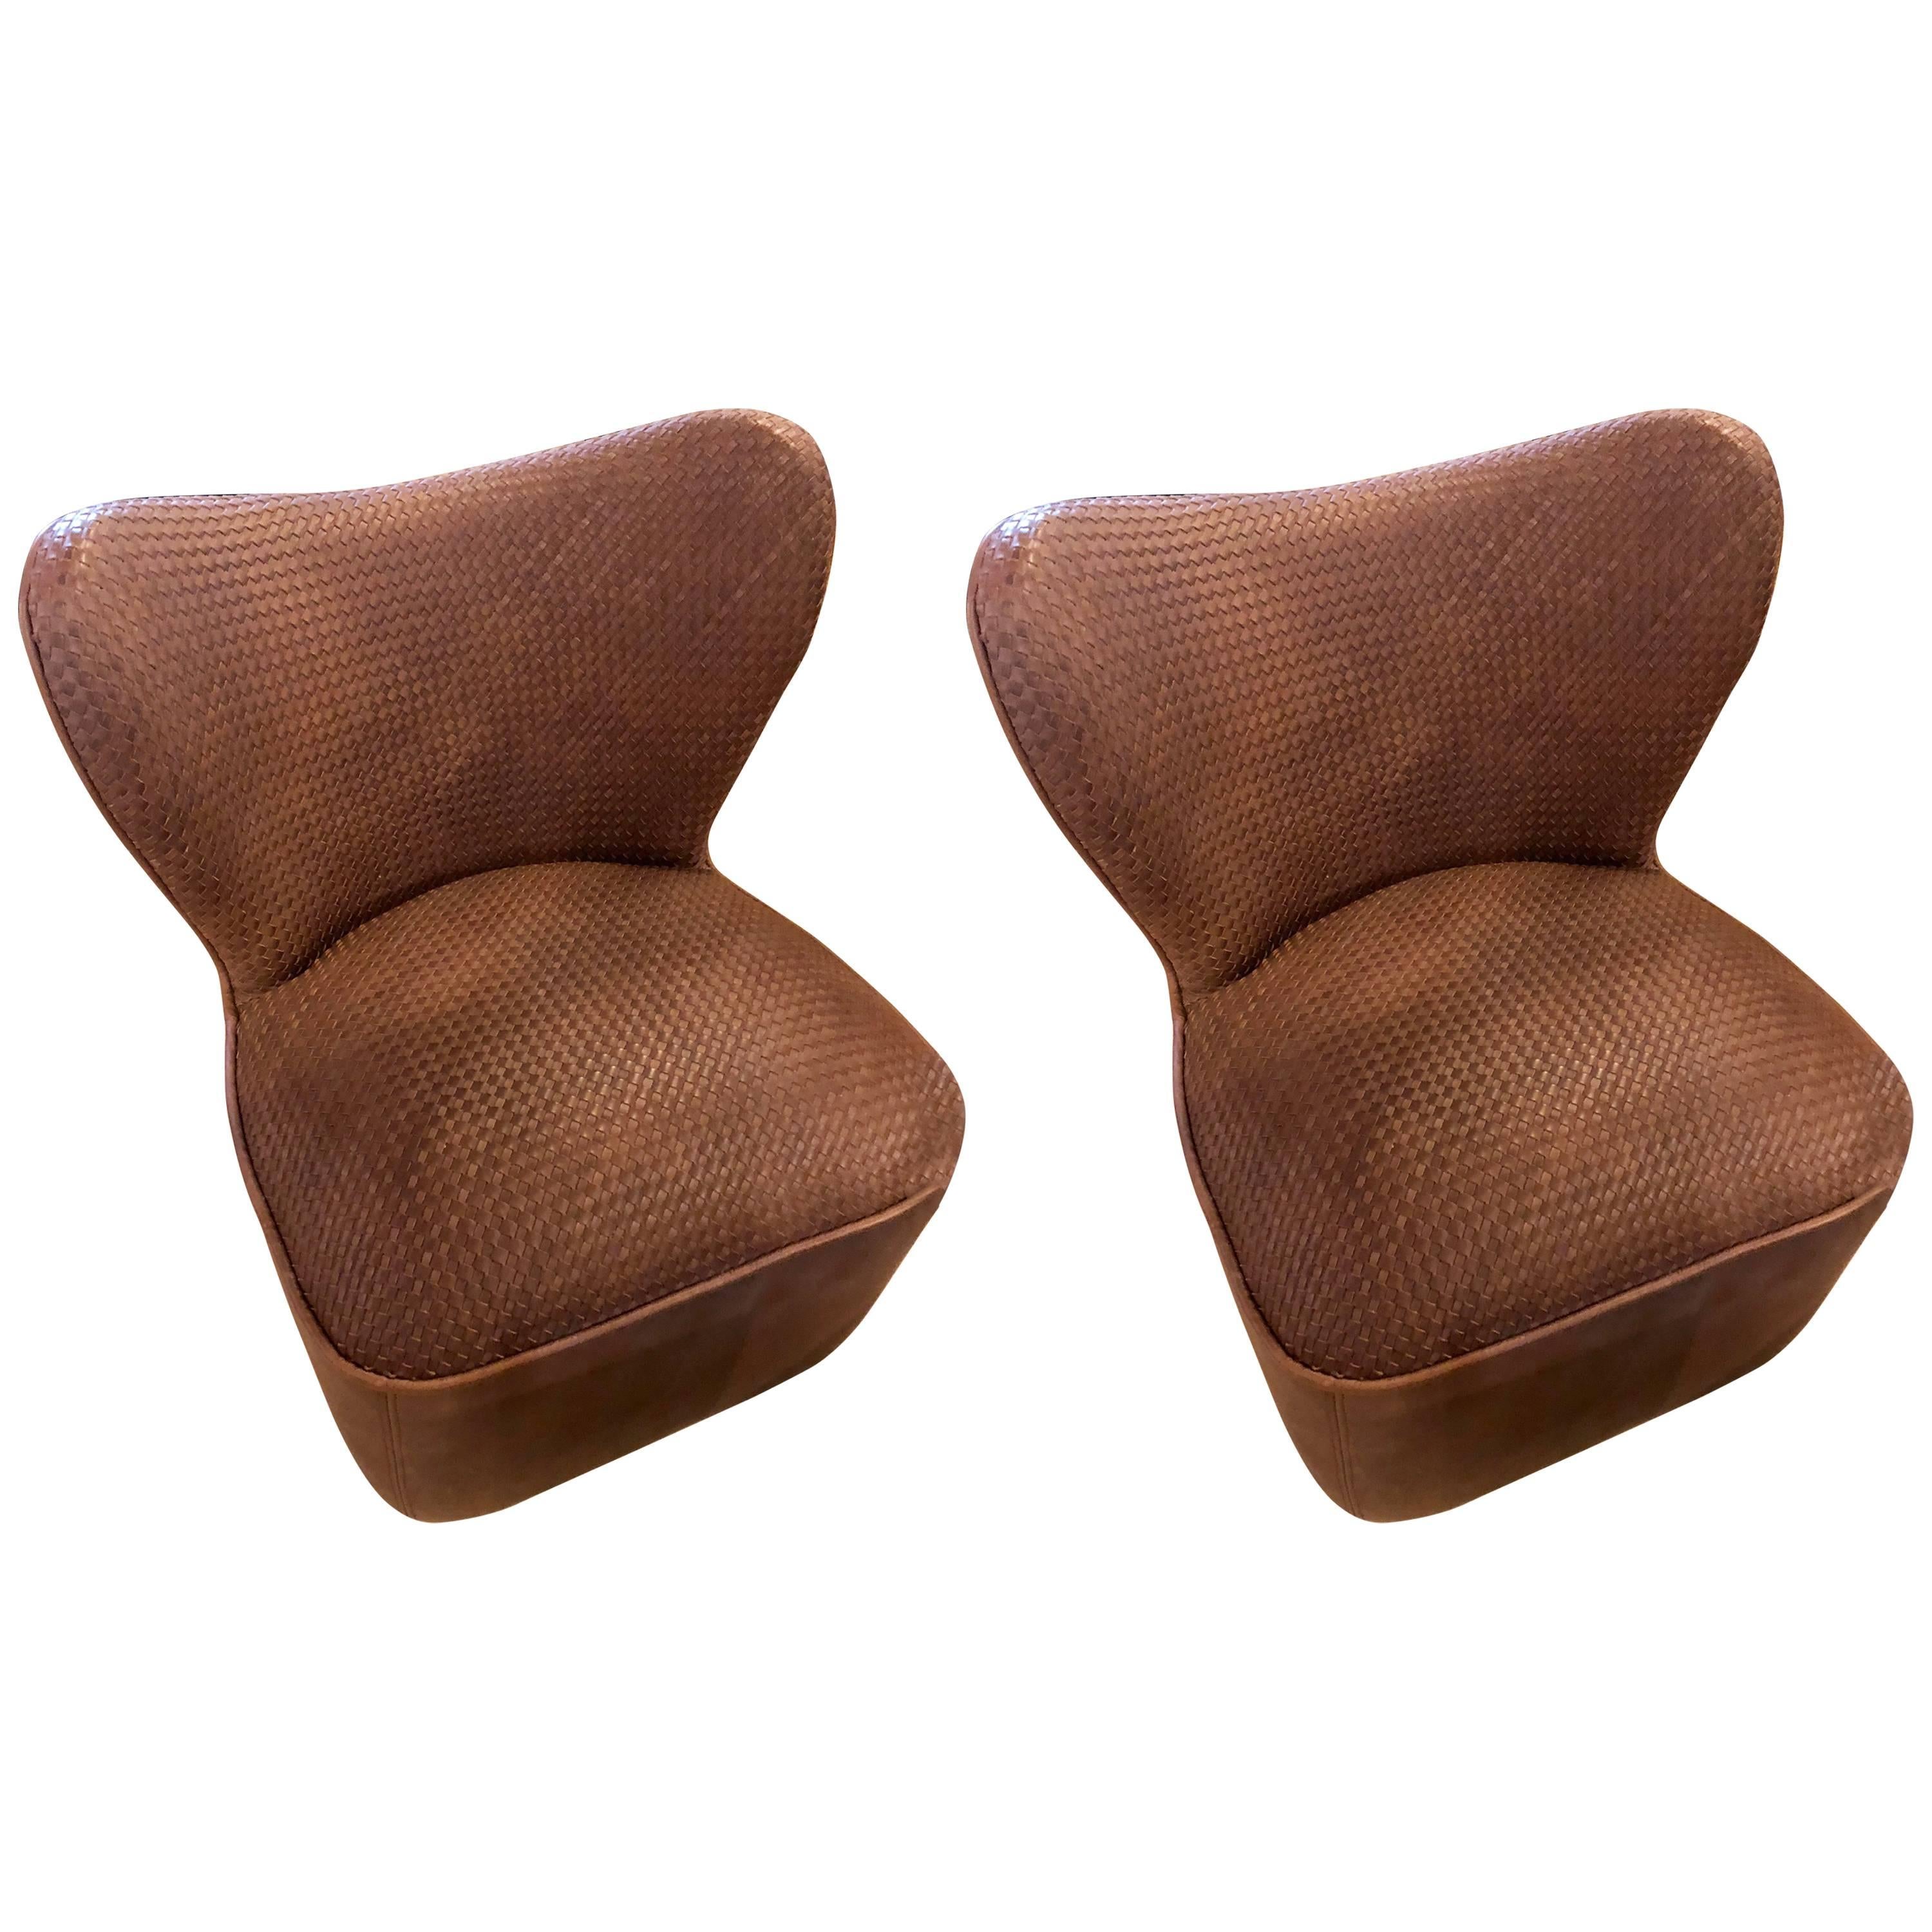 Pair of Woven Modern Leather Seat and Backrest Side Chairs in Brown